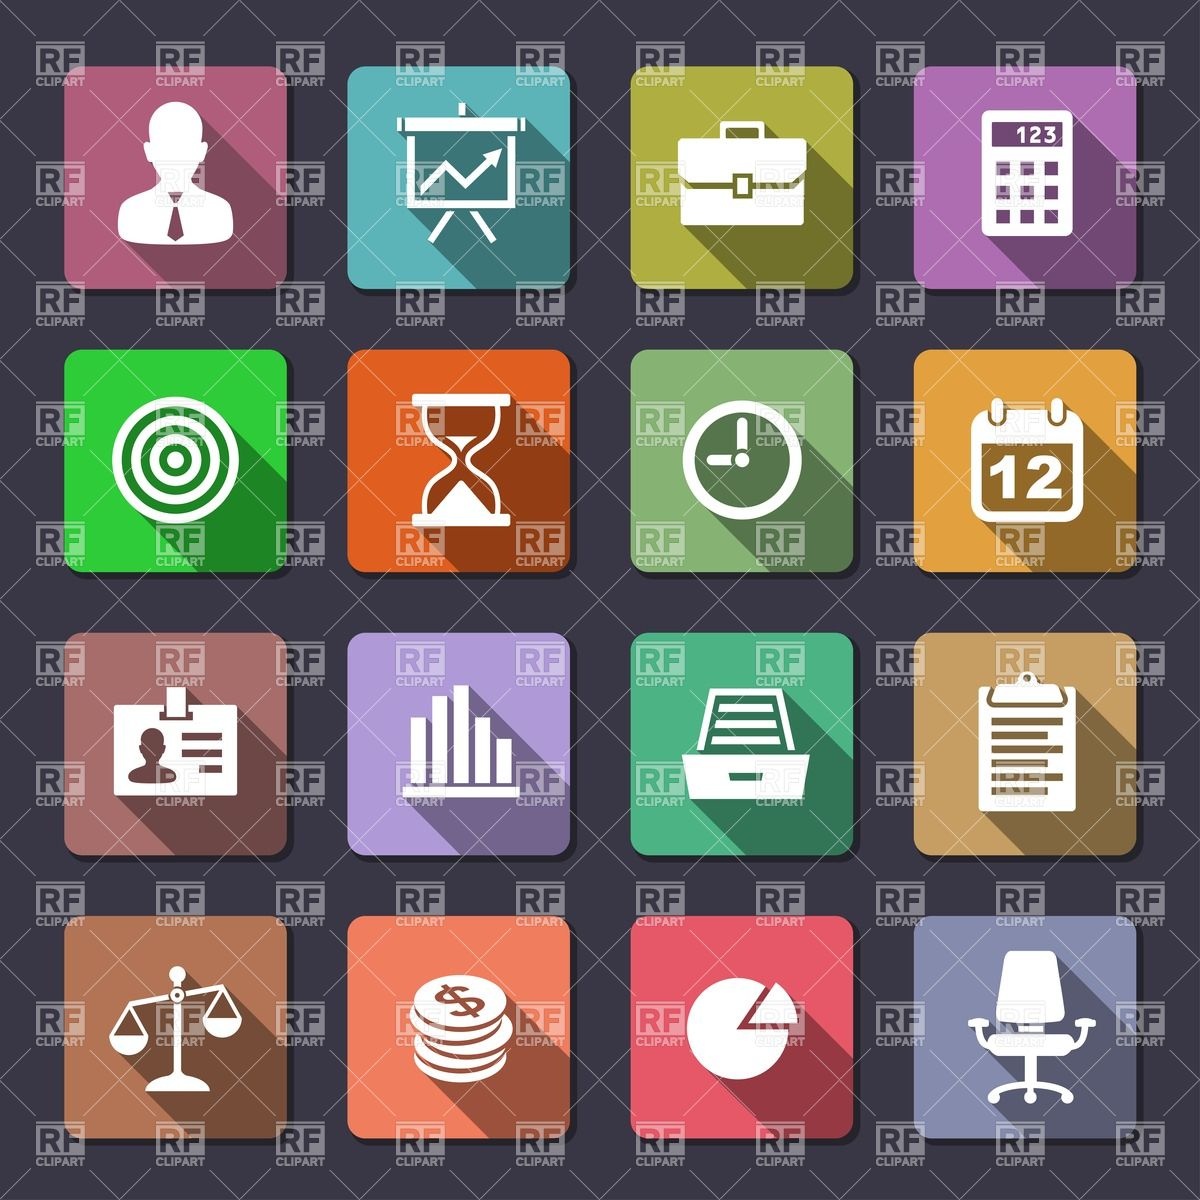 Royalty Free Business Icons